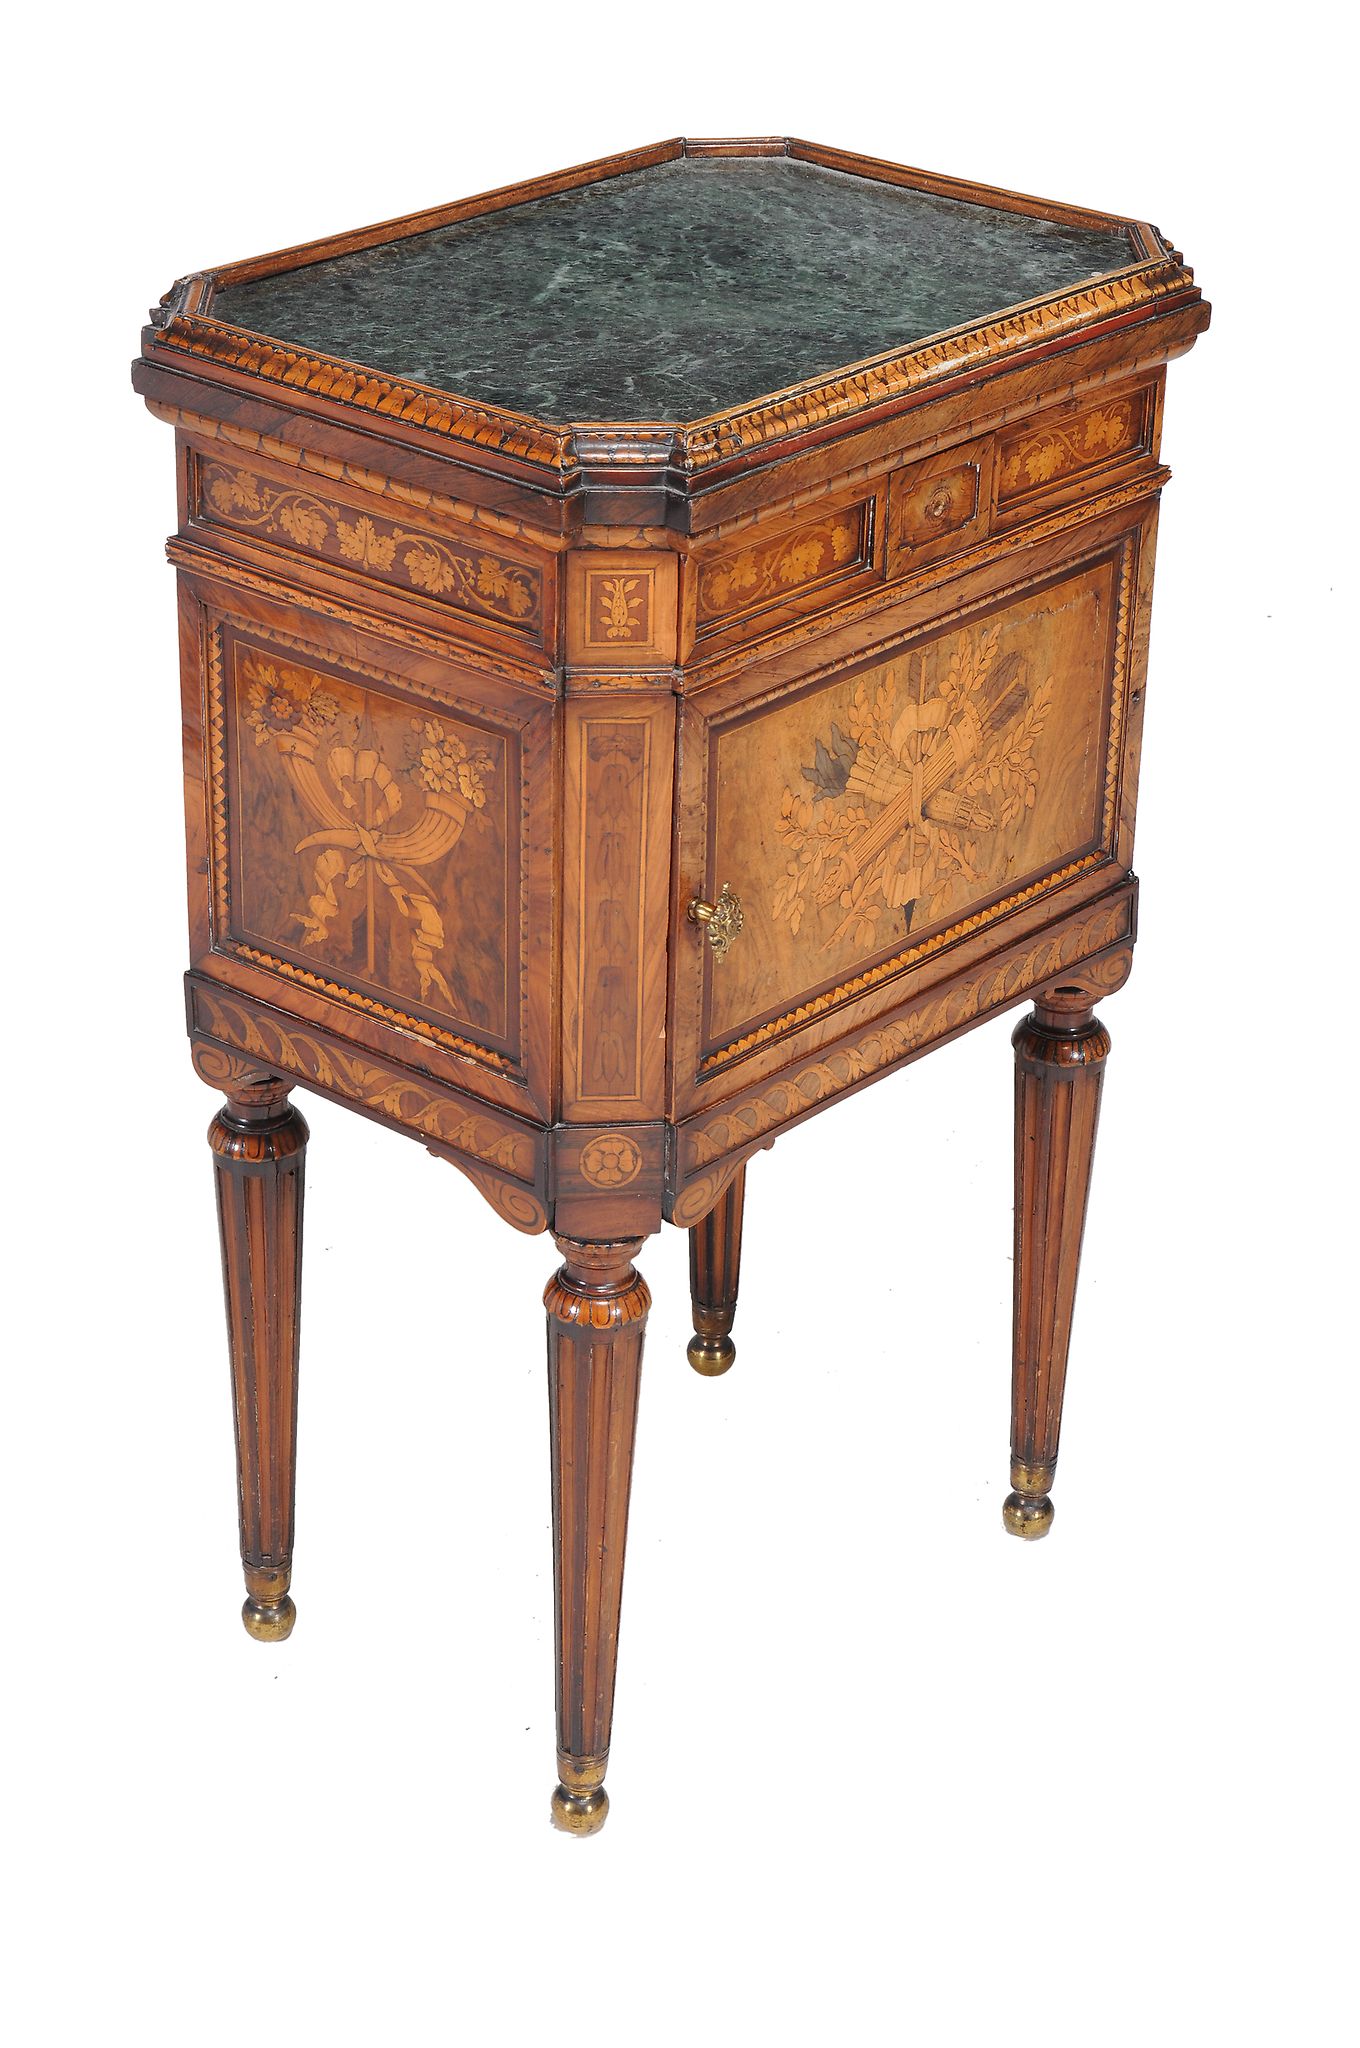 A Continental walnut, rosewood and marquetry cabinet, in Louis XVI style - Image 7 of 7